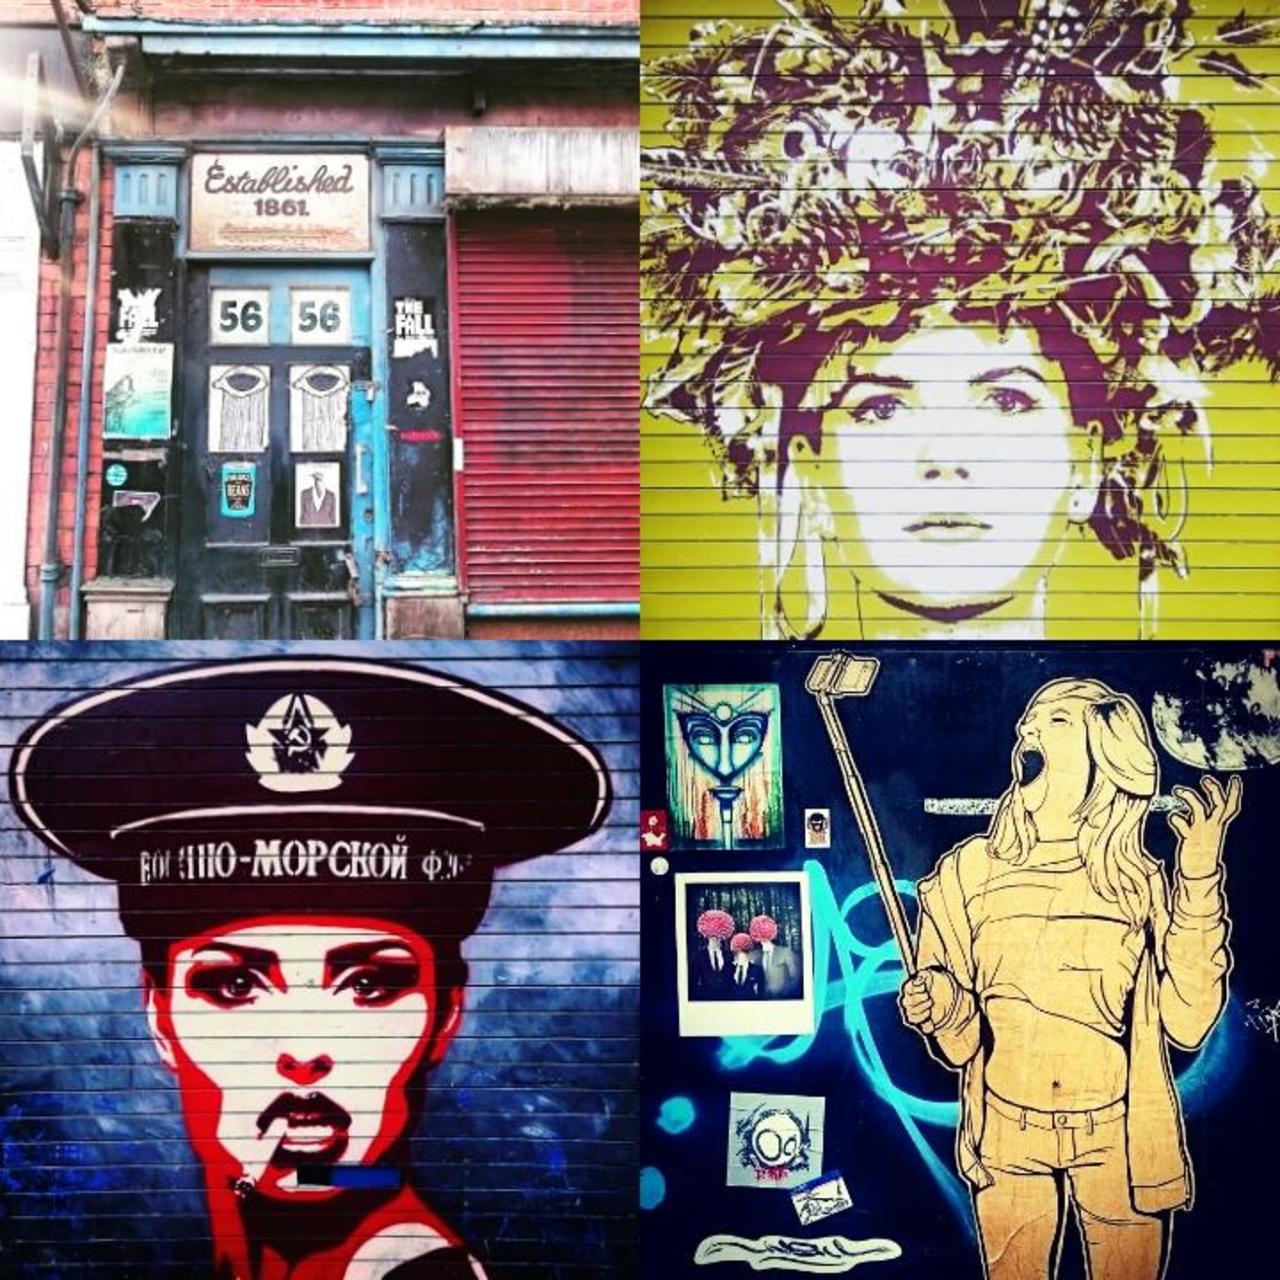 Inspired by my visit to @Chesterart92 I've gone back to my roots today #Manchester #graffiti #streetart #shotbyamy http://t.co/tMhZcSbBCj